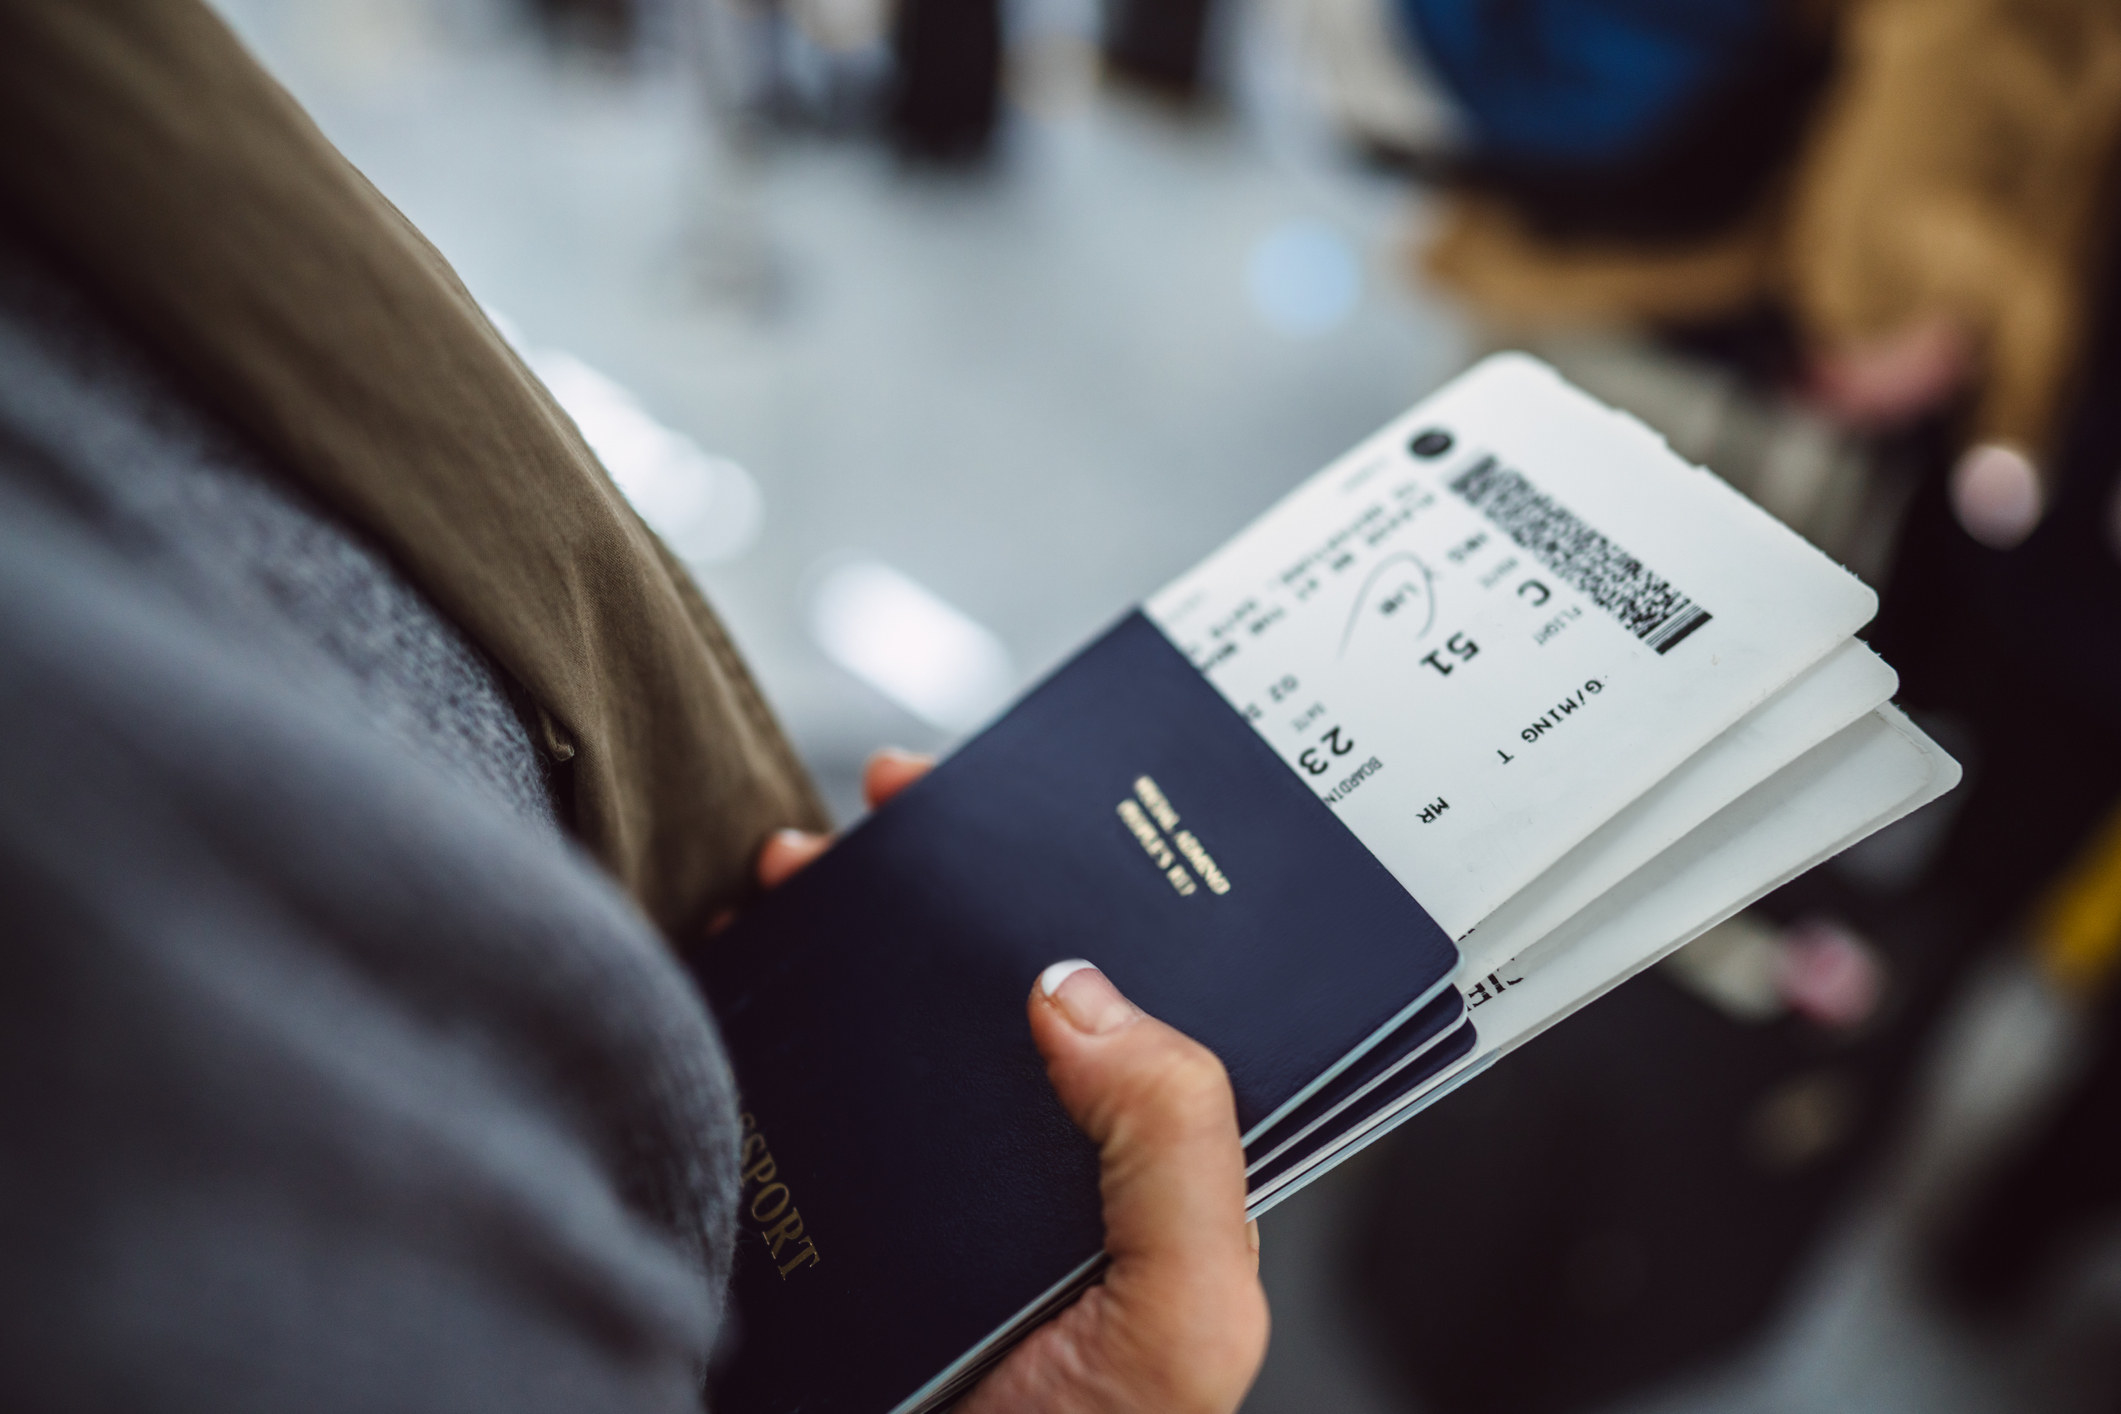 A person holding plane tickets and passports